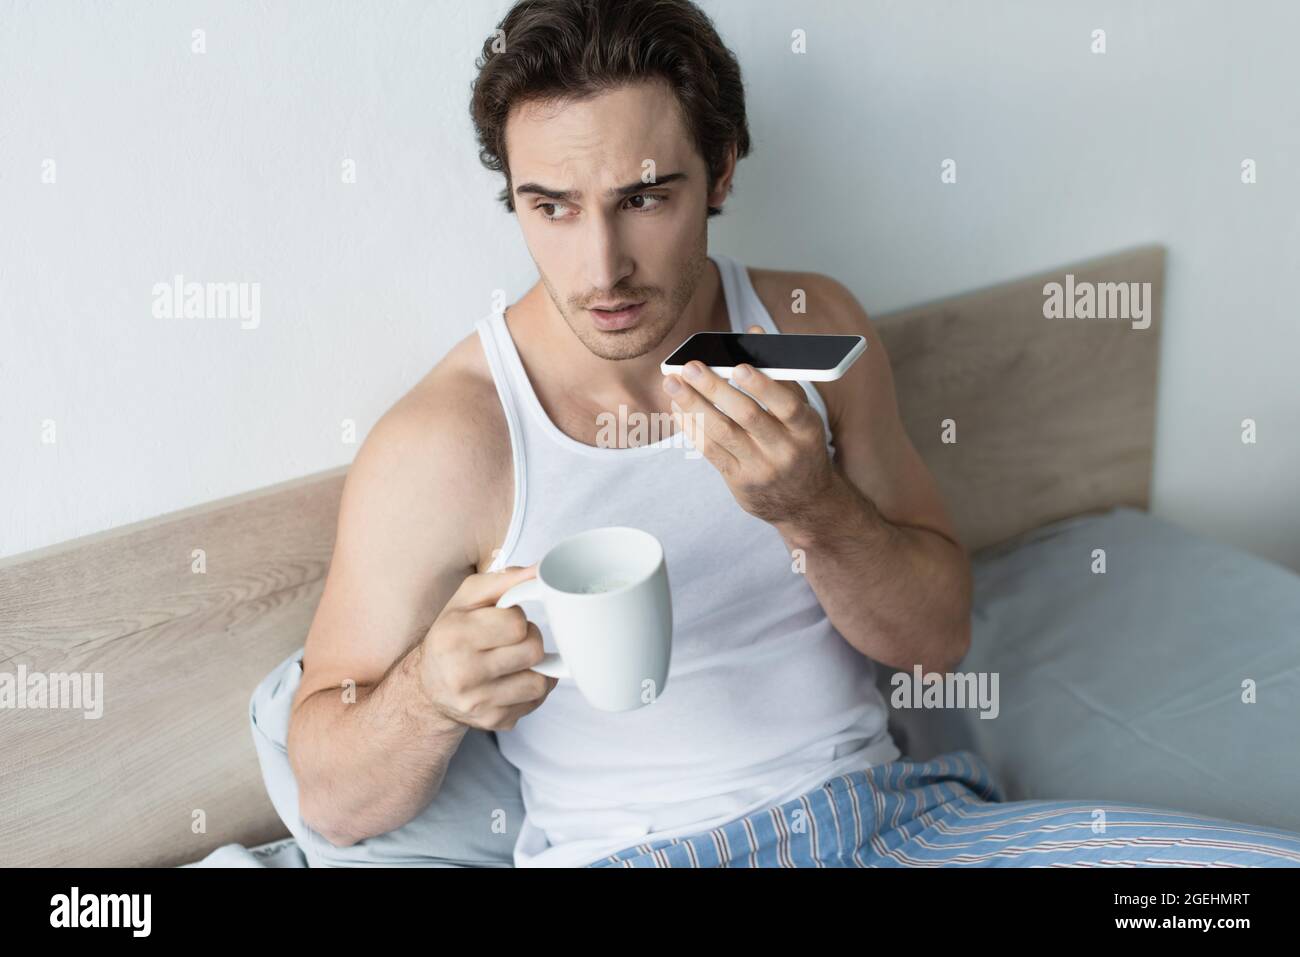 young man sending voice message while holding cup of coffee Stock Photo